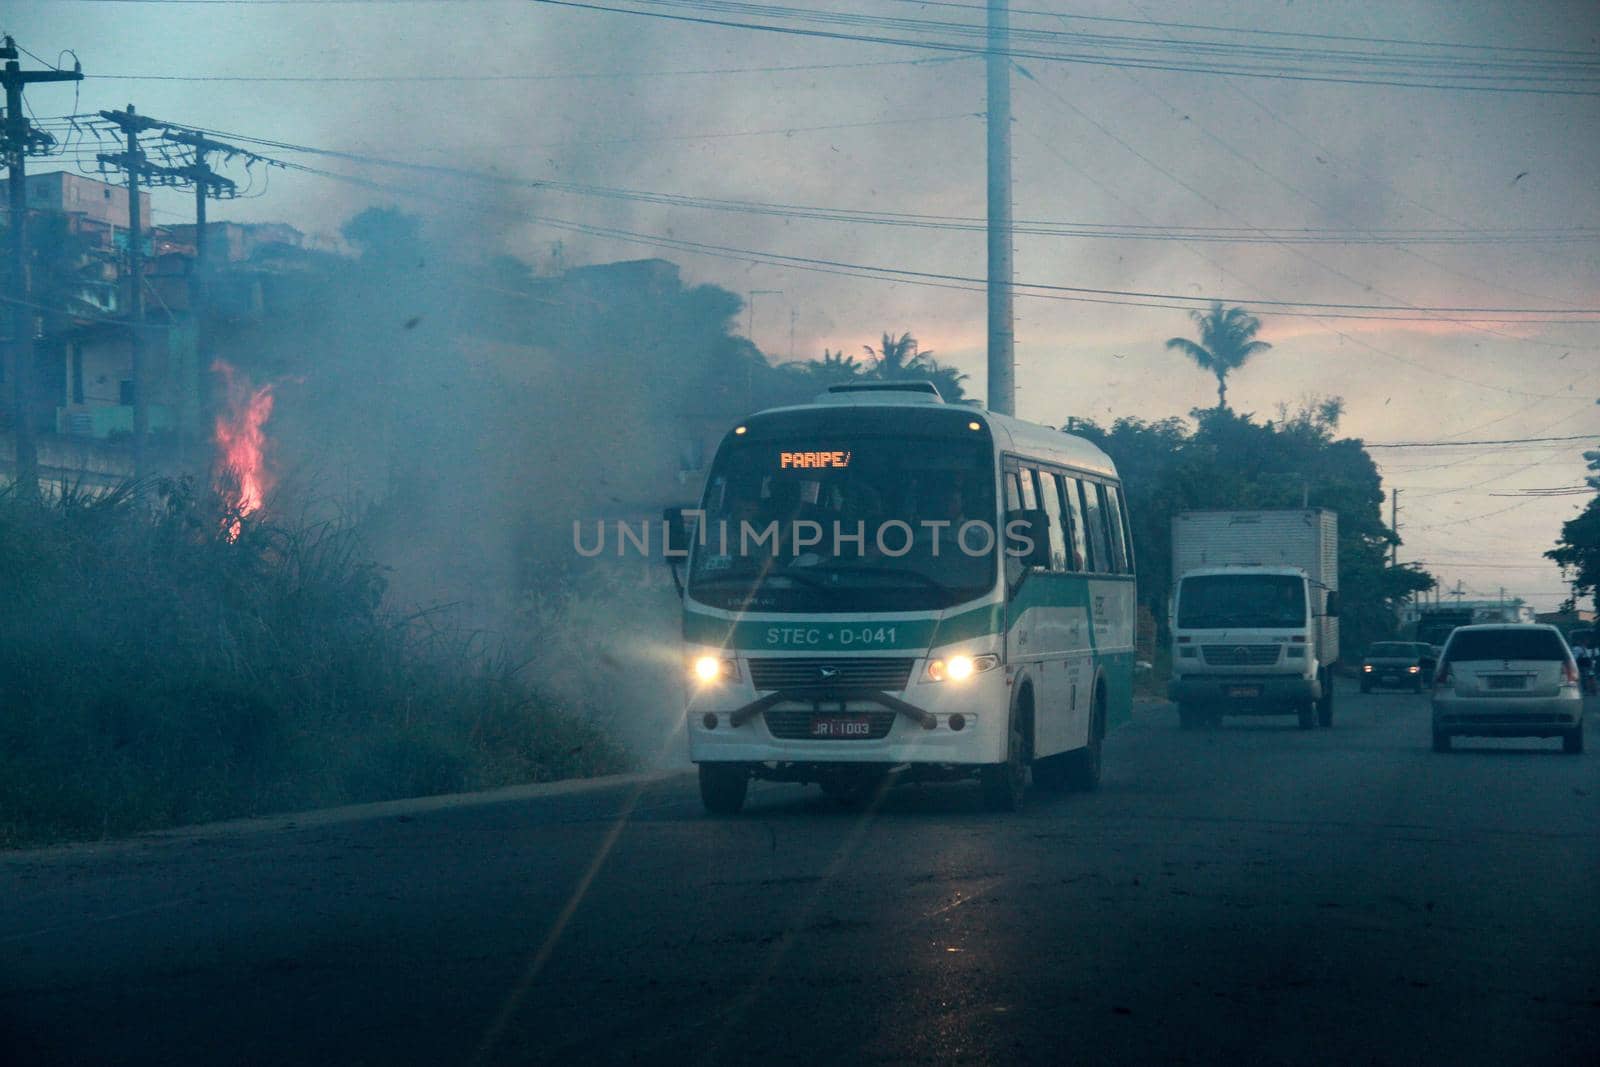 salvador, bahia / brazil - november 29, 2012: vehicles are seen roaming near the smoke from burning vegetation on the BA 528 highway, Fazenda Coutos region in the city of Salvador.